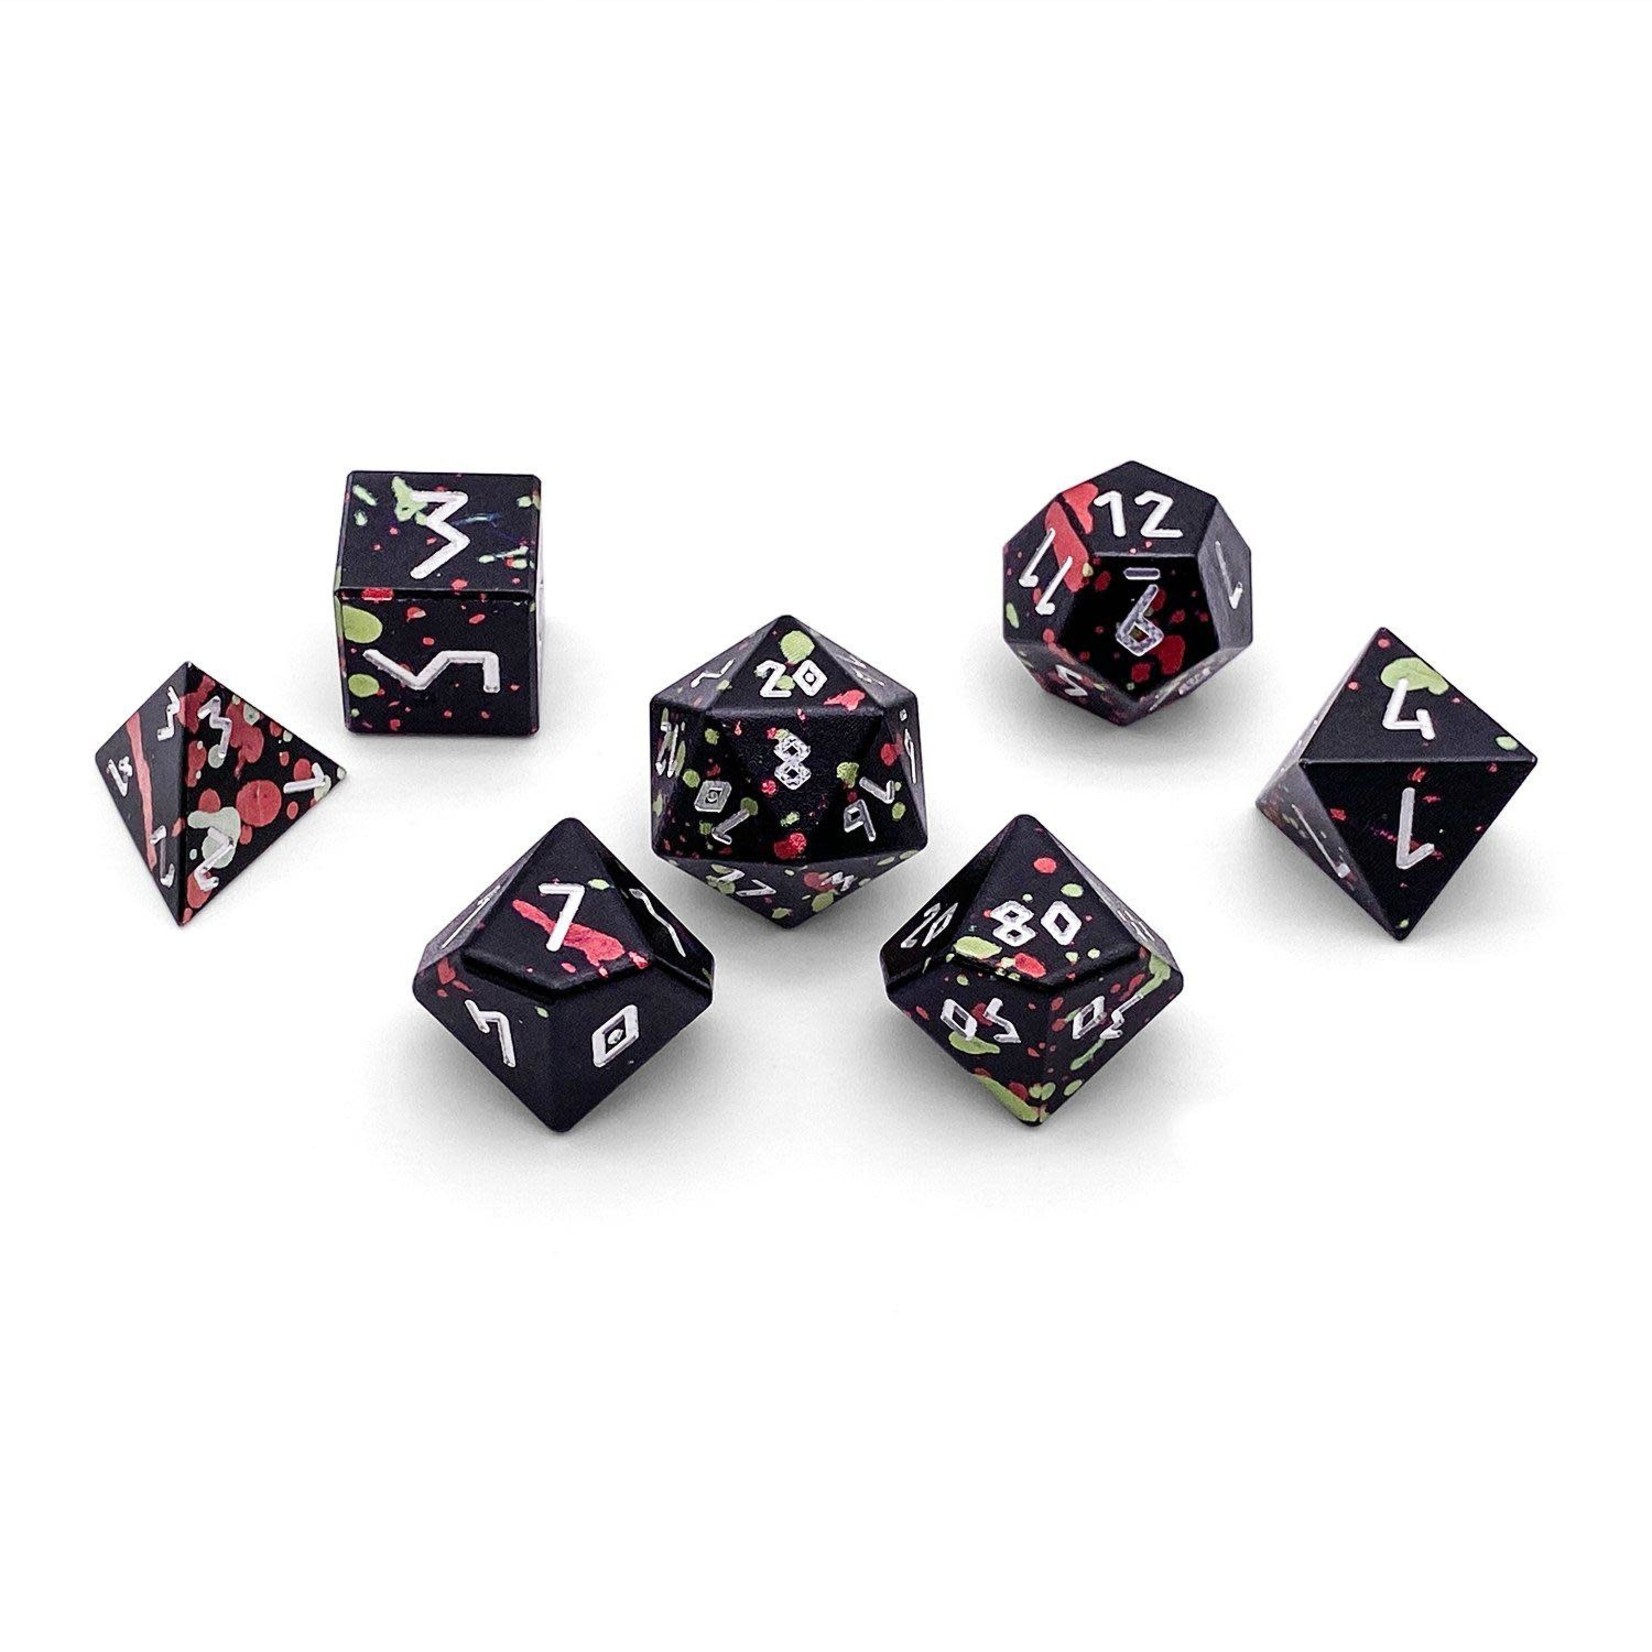 Norse Foundry Norse Foundry Dice: Aluminum Wondrous Dice - Astral Plane